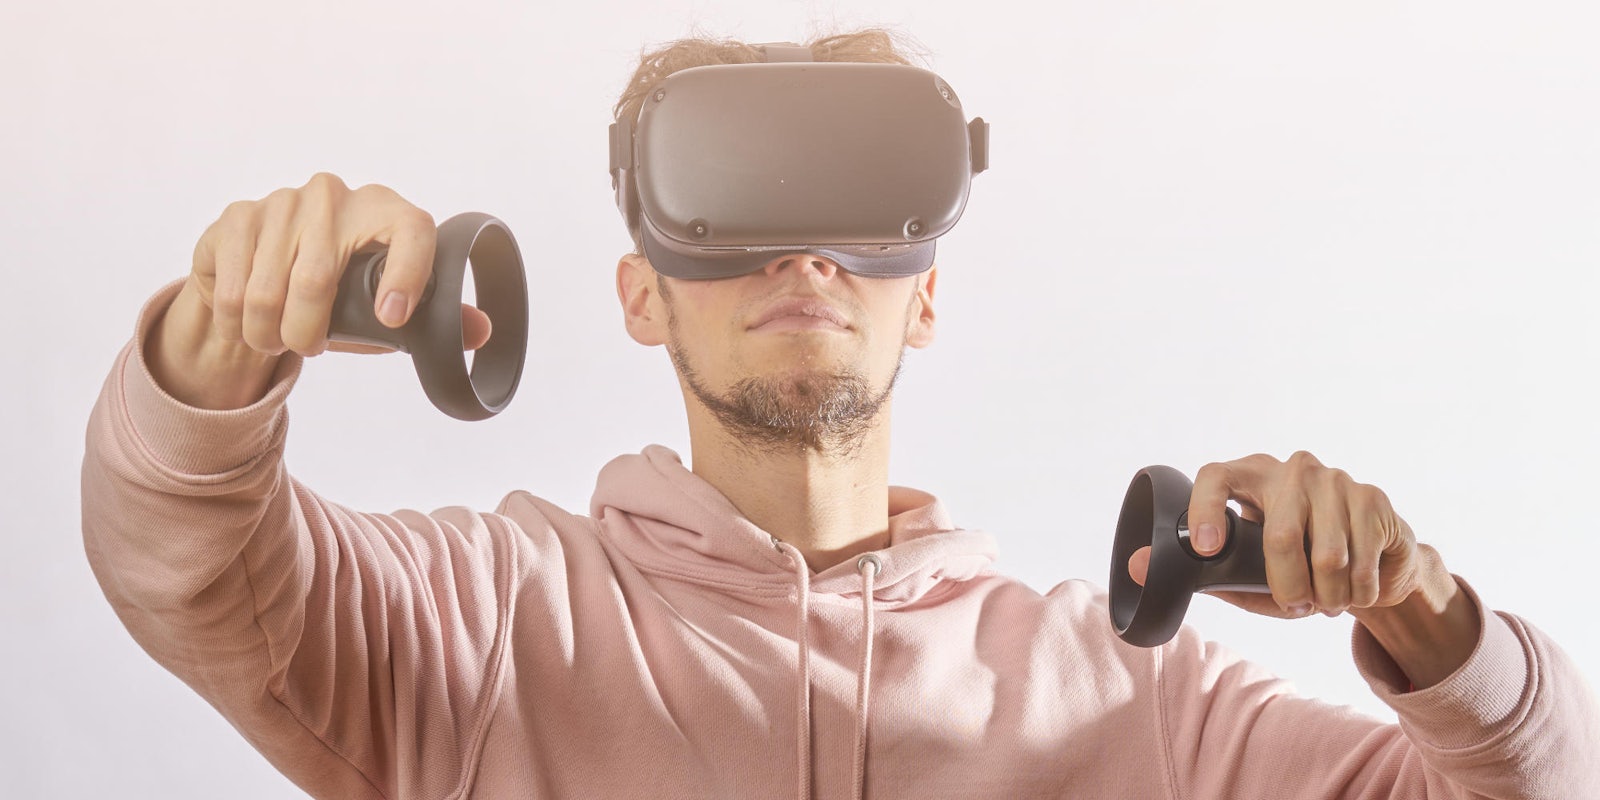 photo of a man using the Oculus VR gaming system